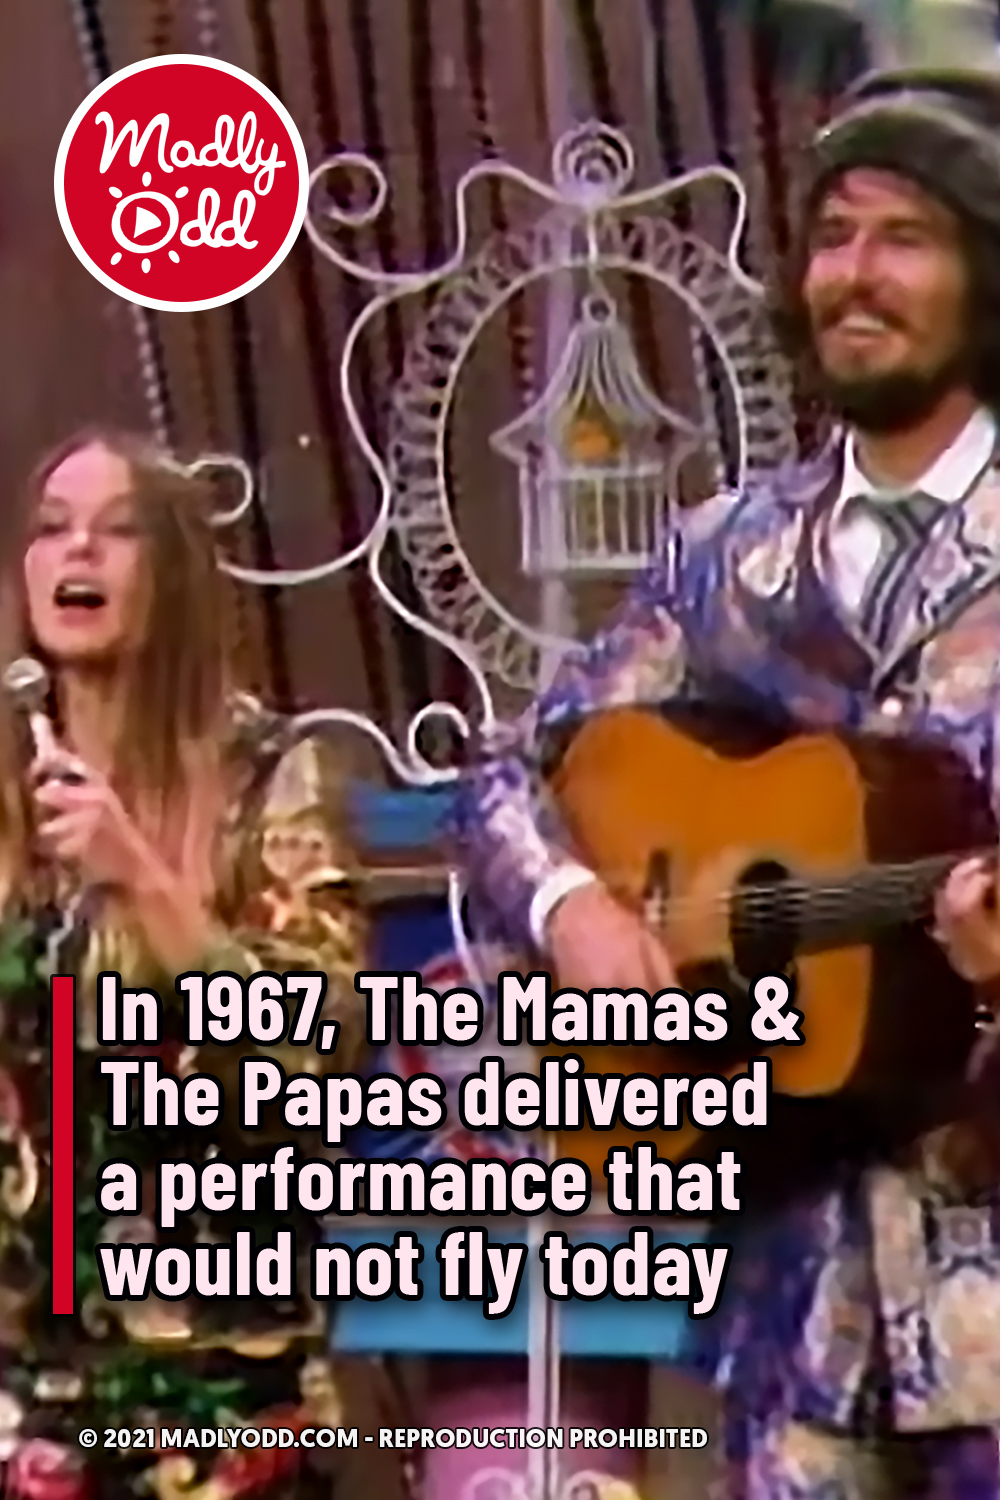 In 1967, The Mamas & The Papas delivered a performance that would not fly today